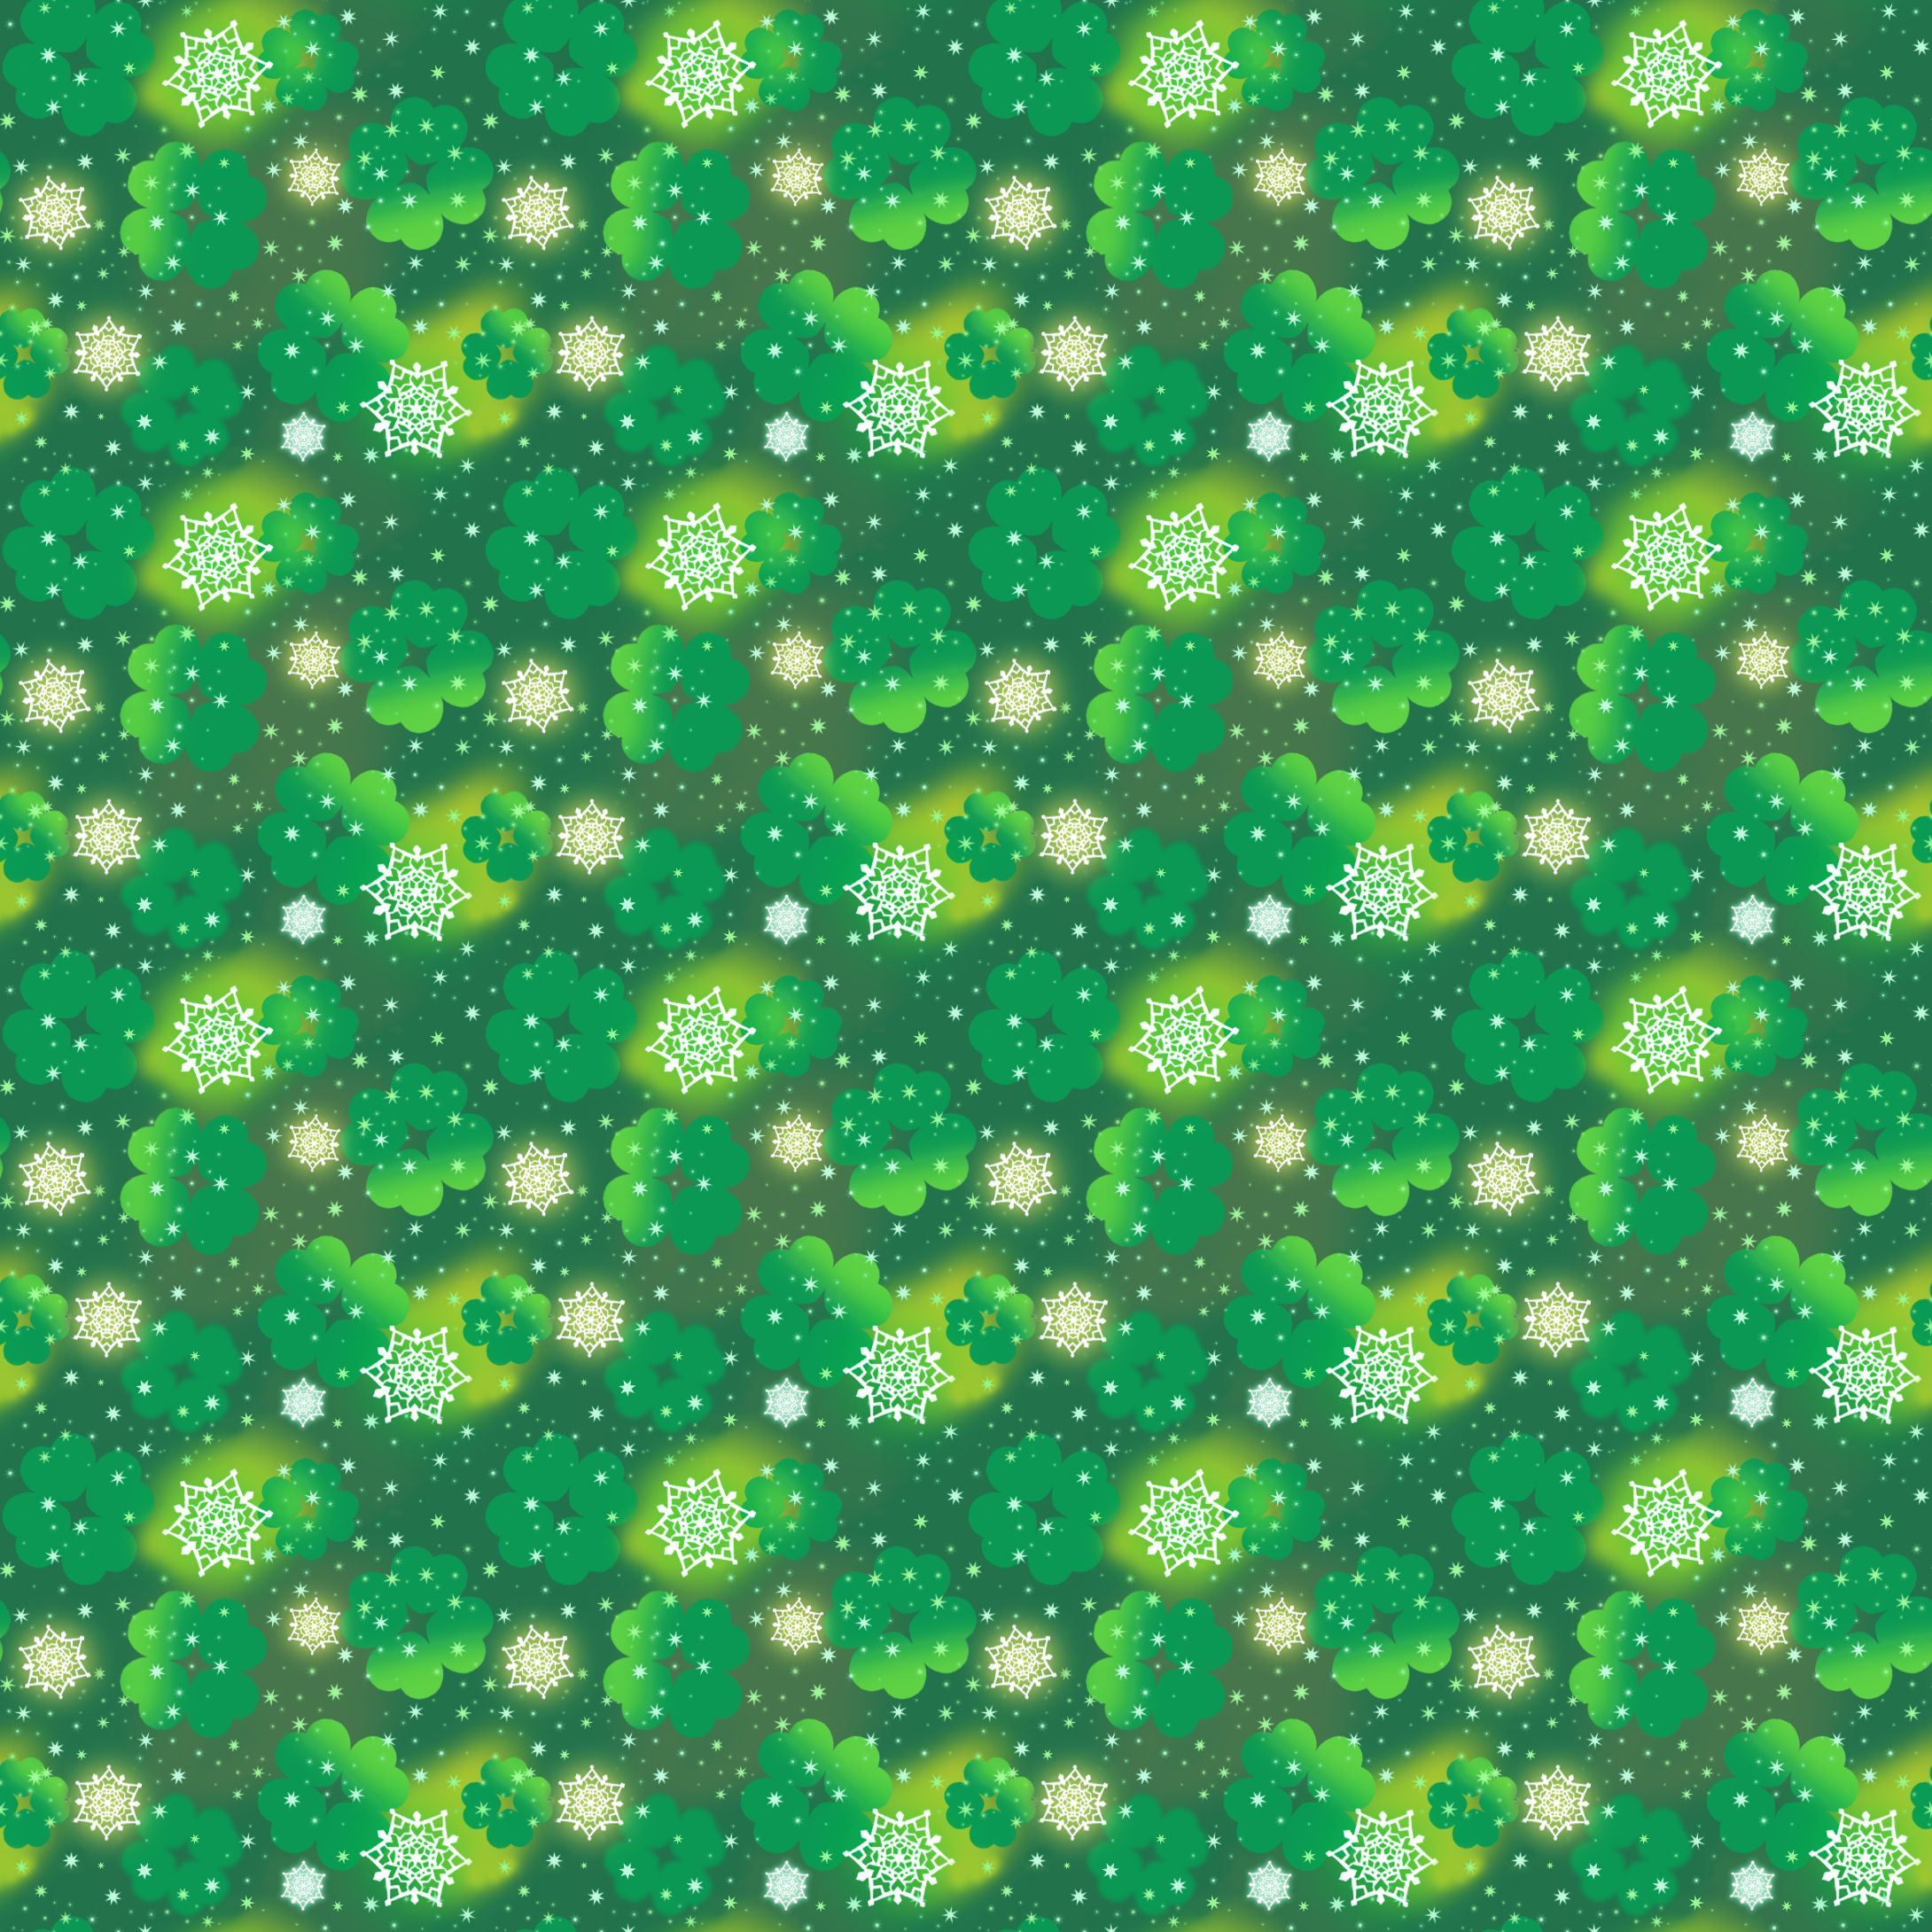 Mobile wallpaper patterns, green, textures, snowflakes, texture, clover